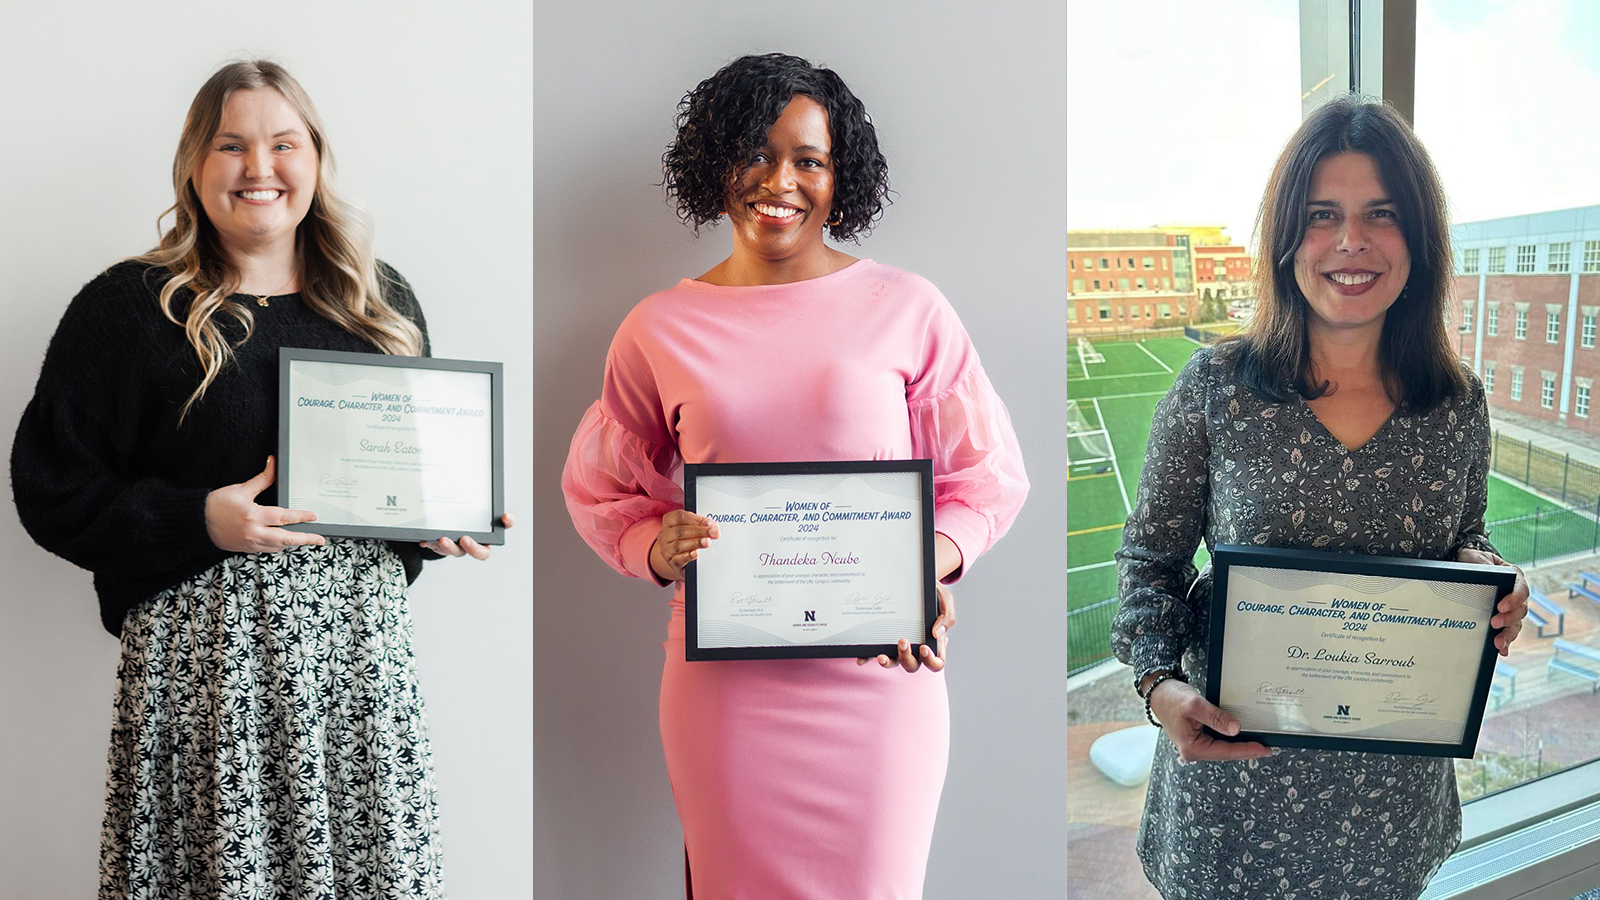 photo collage of individual photos of Sarah Eaton, Thandie Ncube and Loukia Sarroub holding their certificates from the Women of Courage, Character, and Commitment Awards